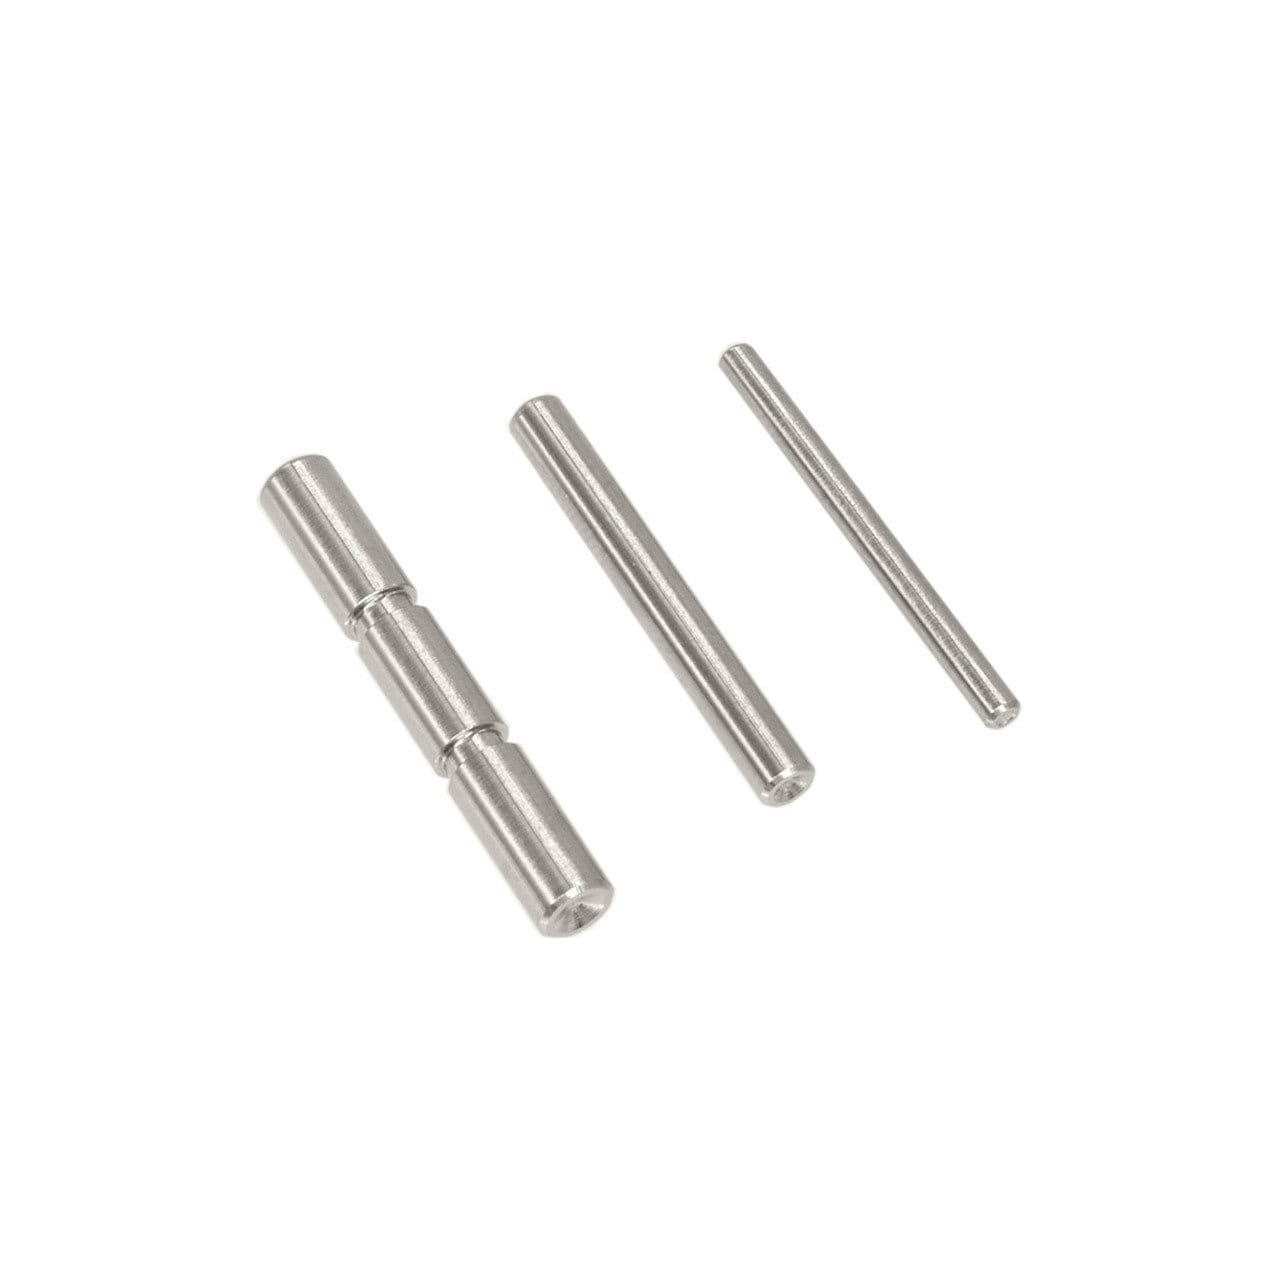 Image of ROOK Tactical Polymer80 Sub-Compact Dimpled Pin Kit (PF940SC) - Stainless Steel